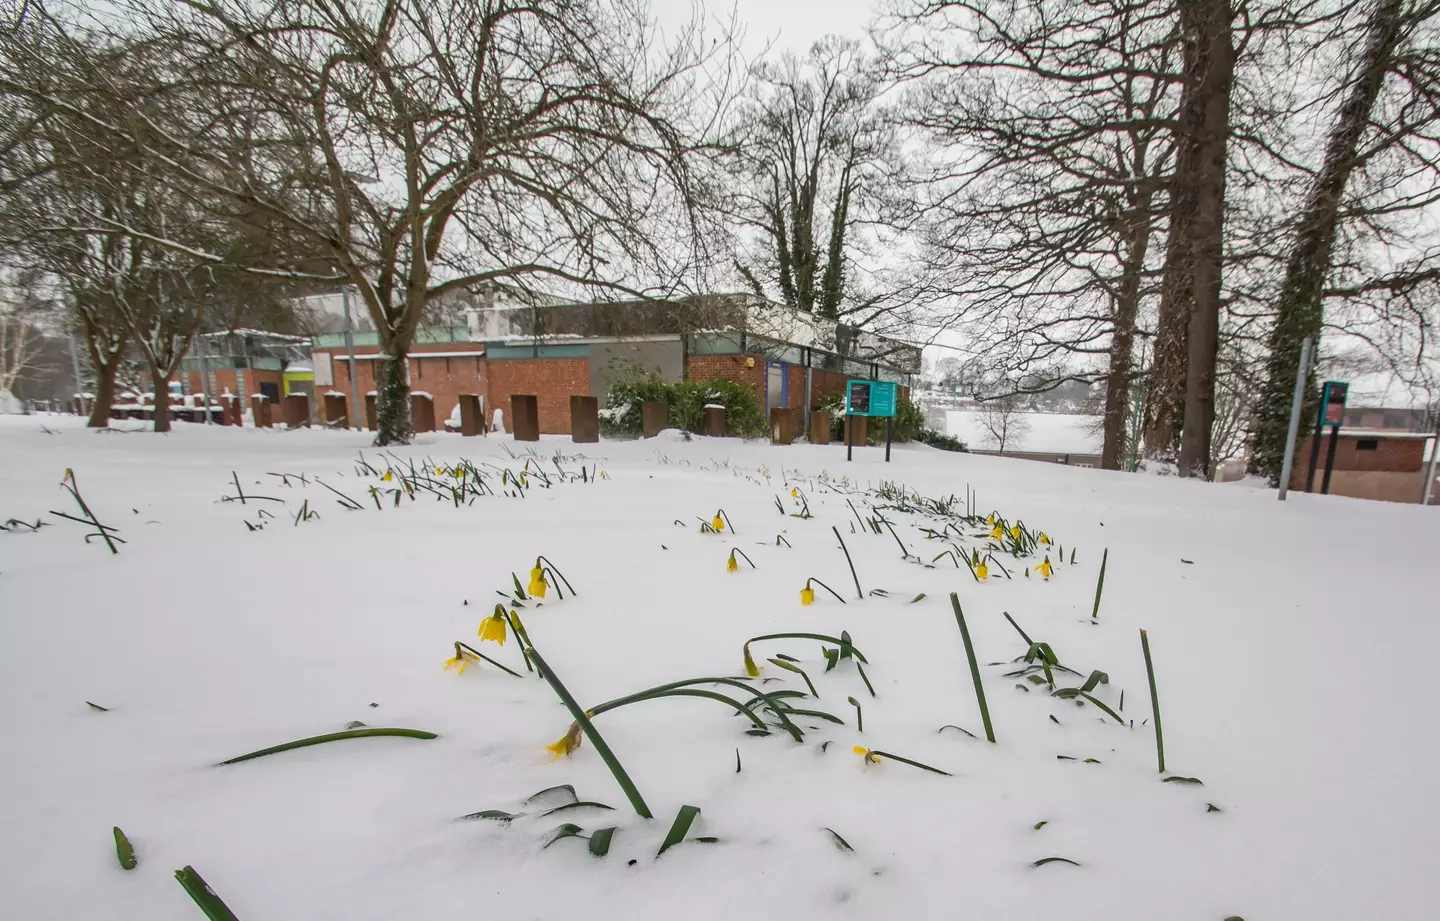 A 'Beast from the East' is on the way and it's bad news for the first blooming flowers of spring.